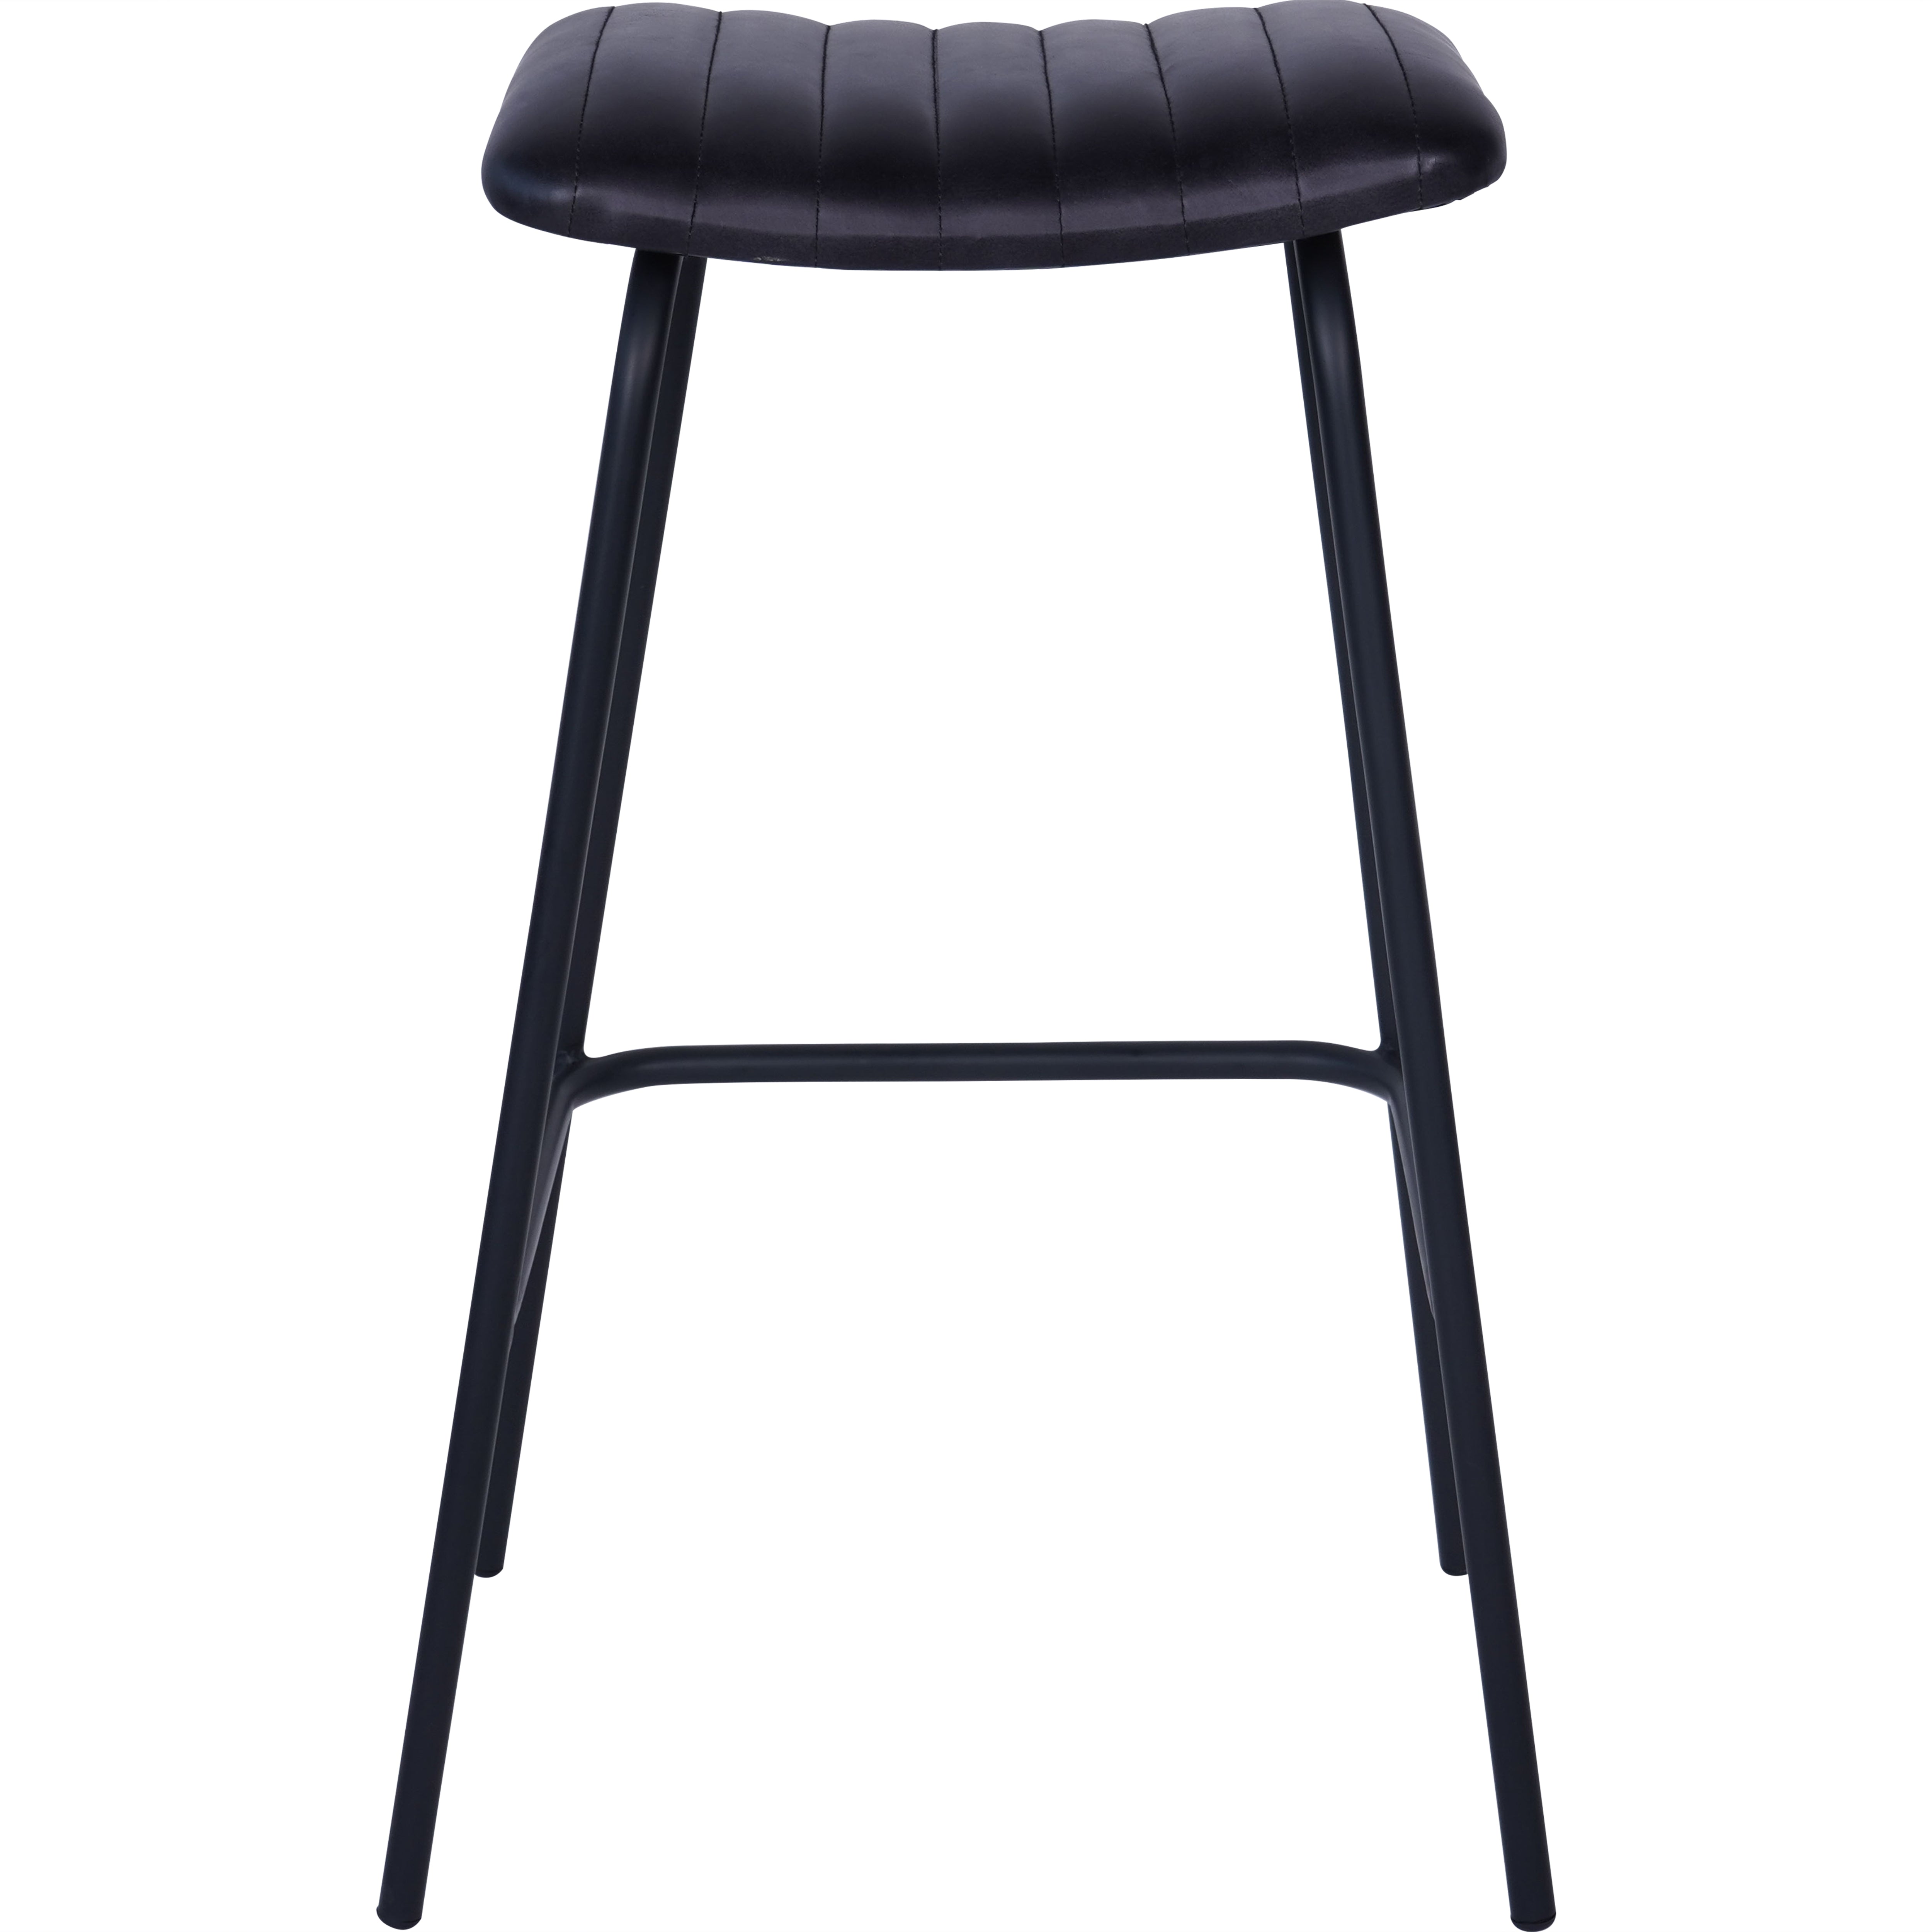 Set of 2 Remi Leather Bar Stools in Charcoal